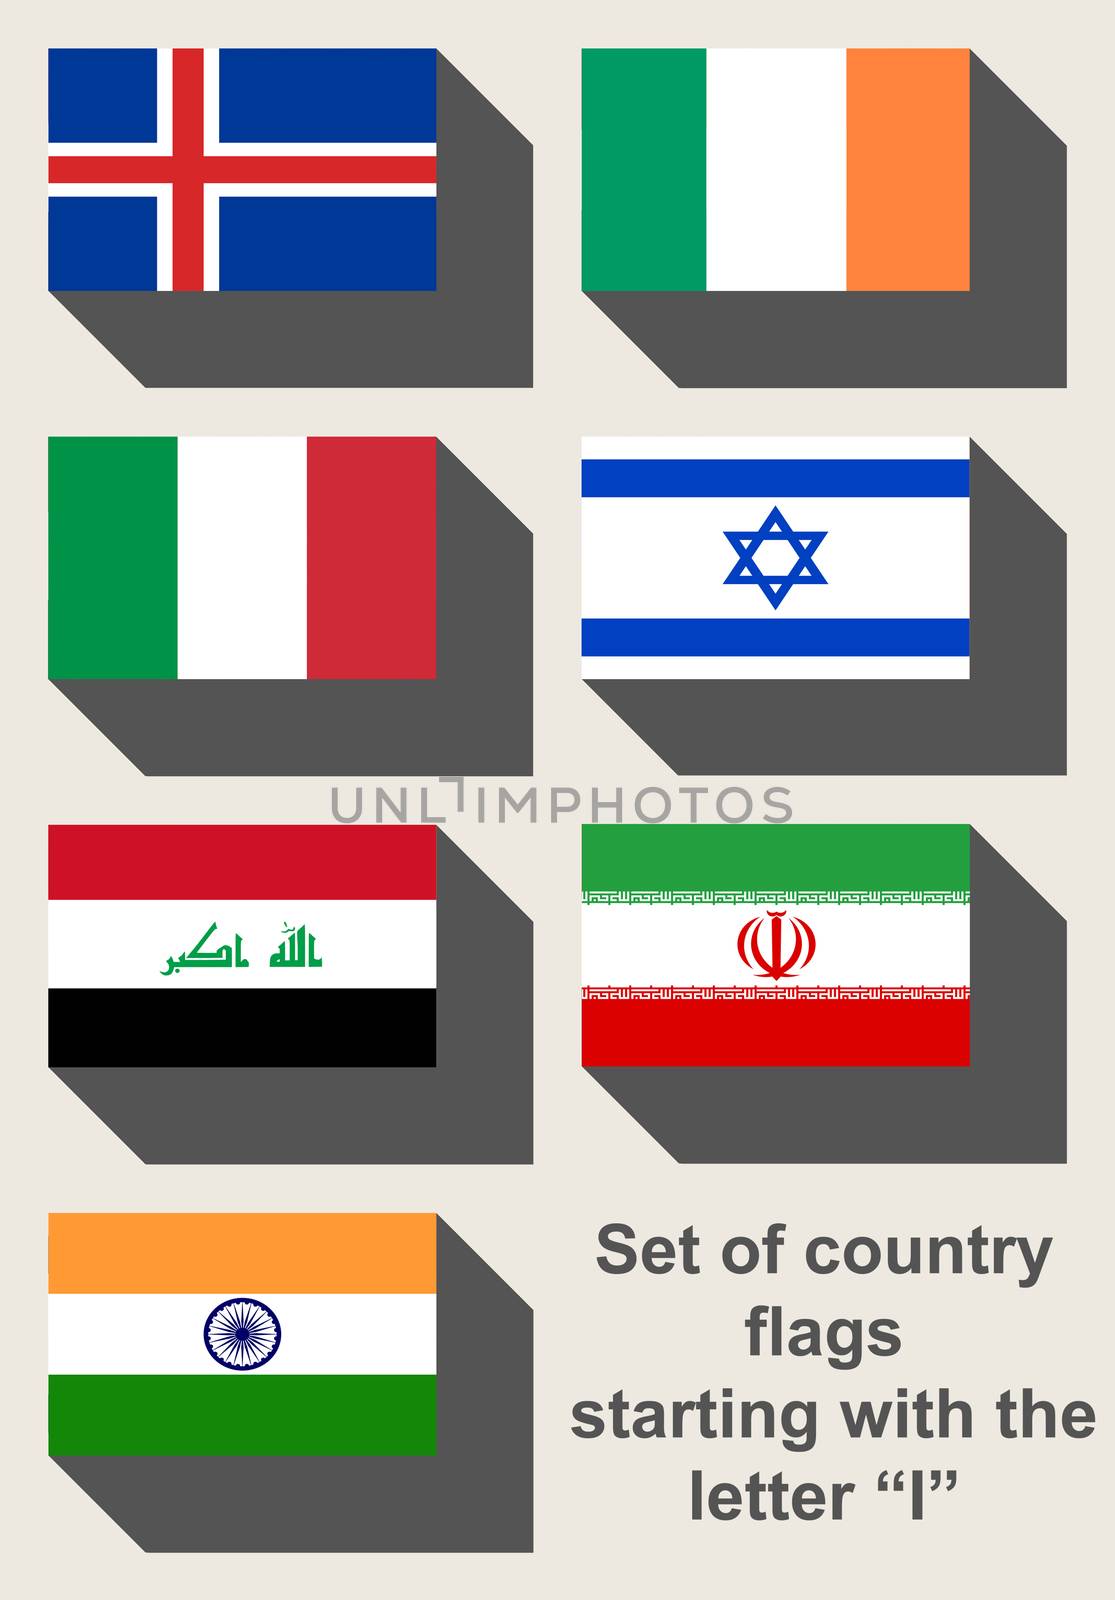 Set of country flags starting with I by speedfighter